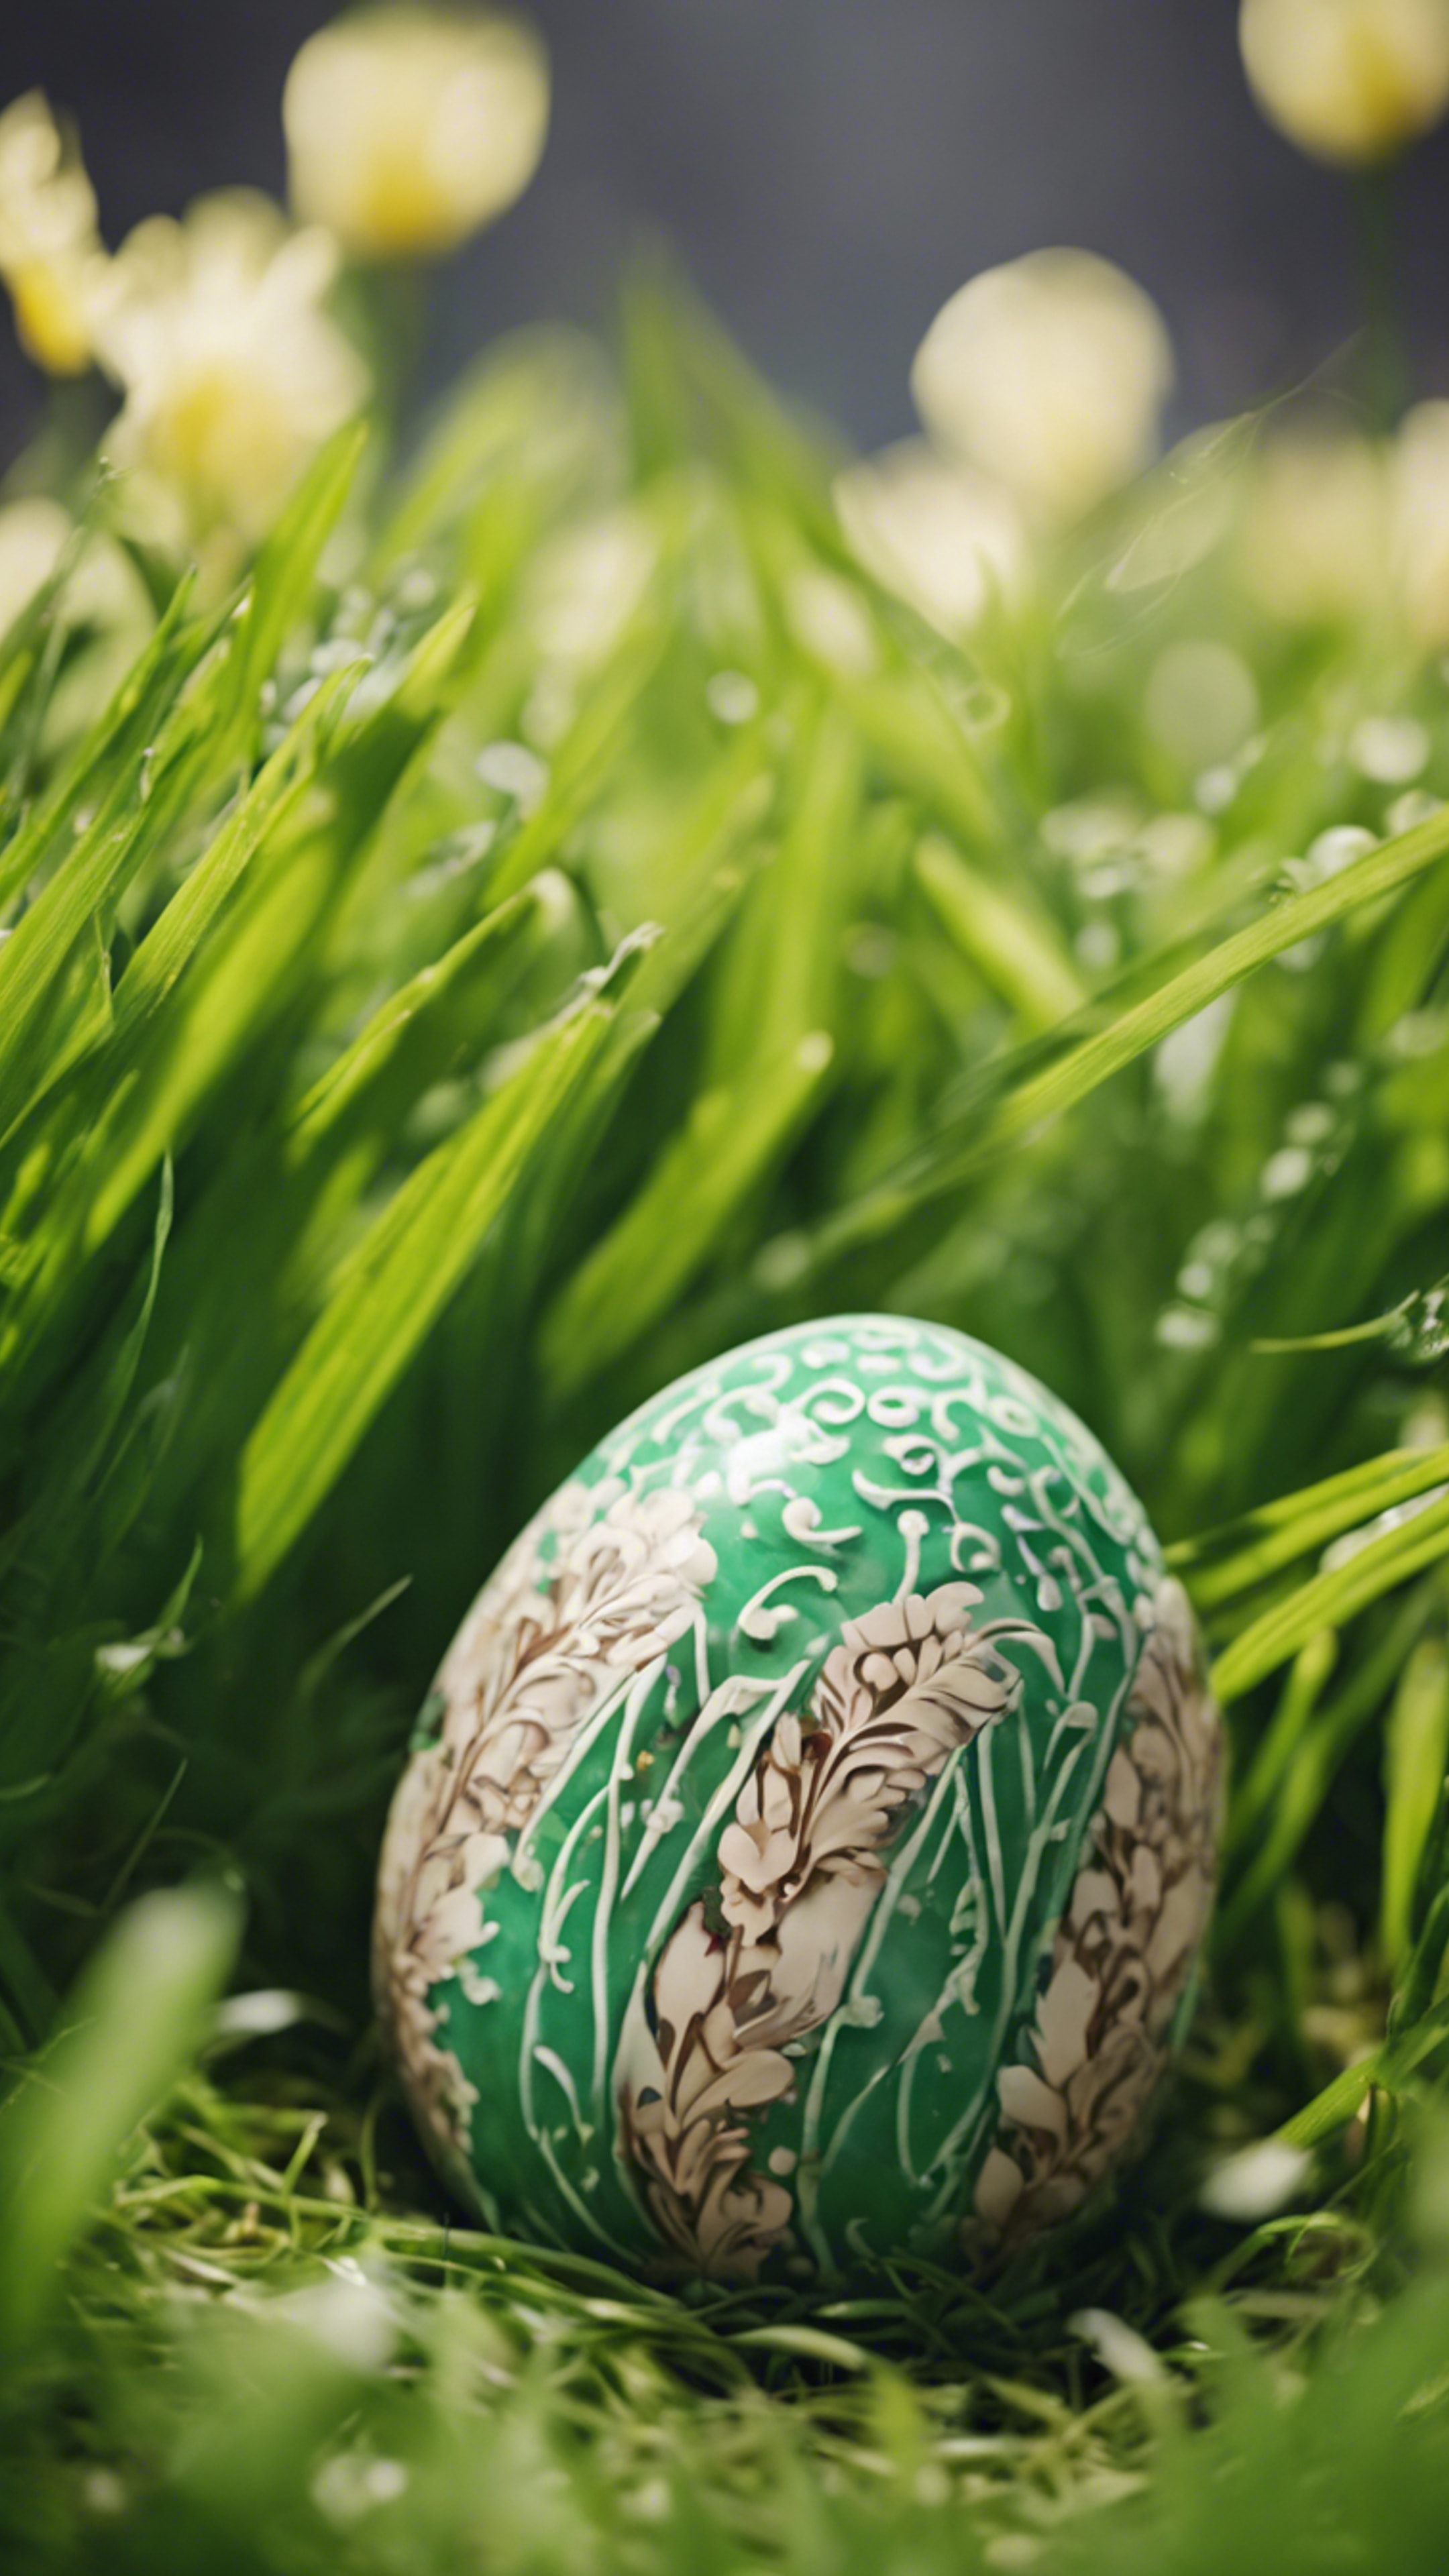 Close-up of a uniquely designed ceramic Easter egg sitting in bright green grass. Wallpaper[195425dd16be462f82eb]